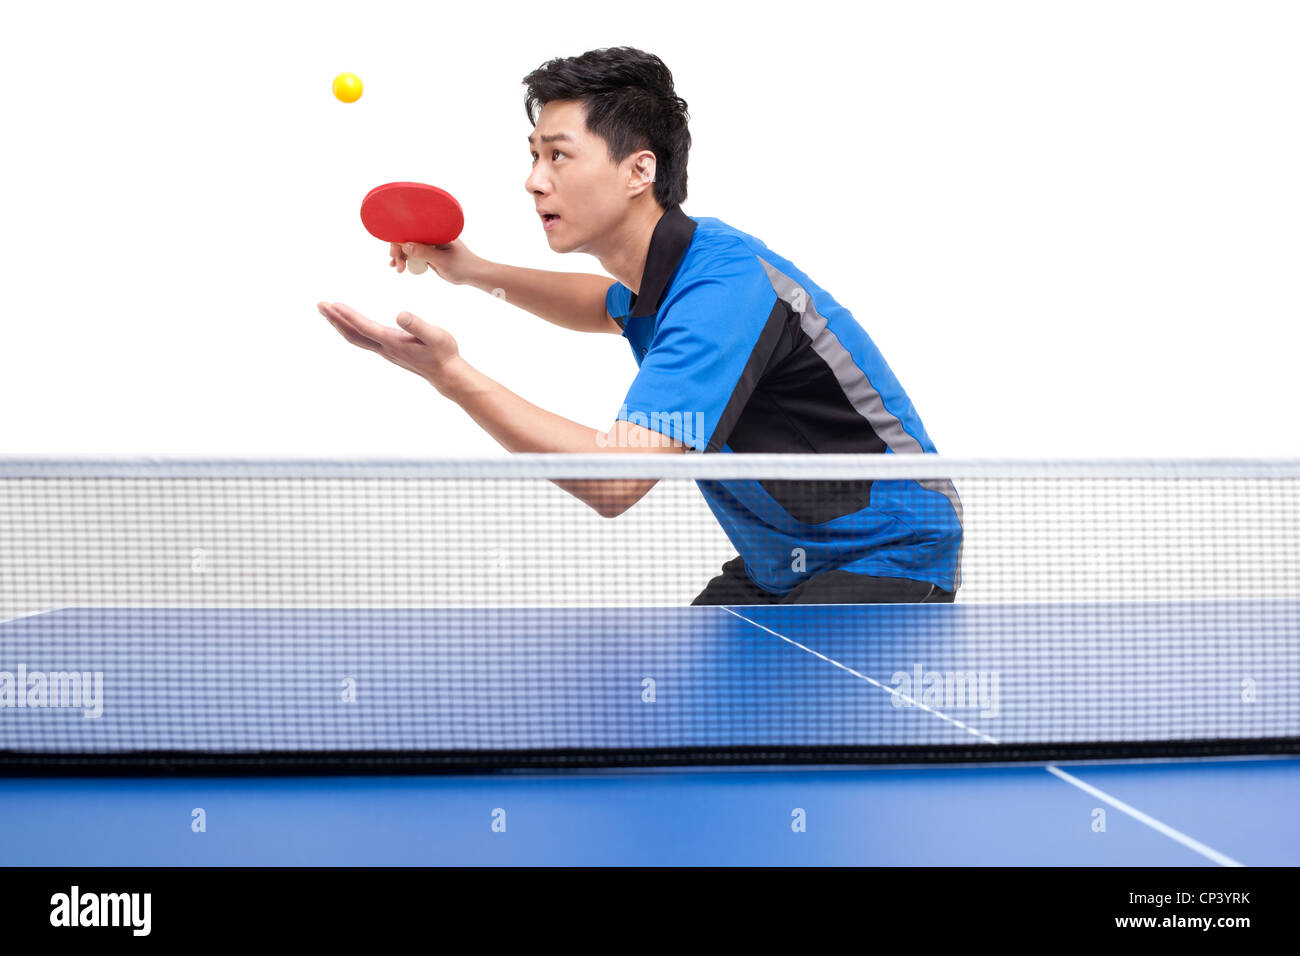 Table tennis player ready to serve Stock Photo - Alamy